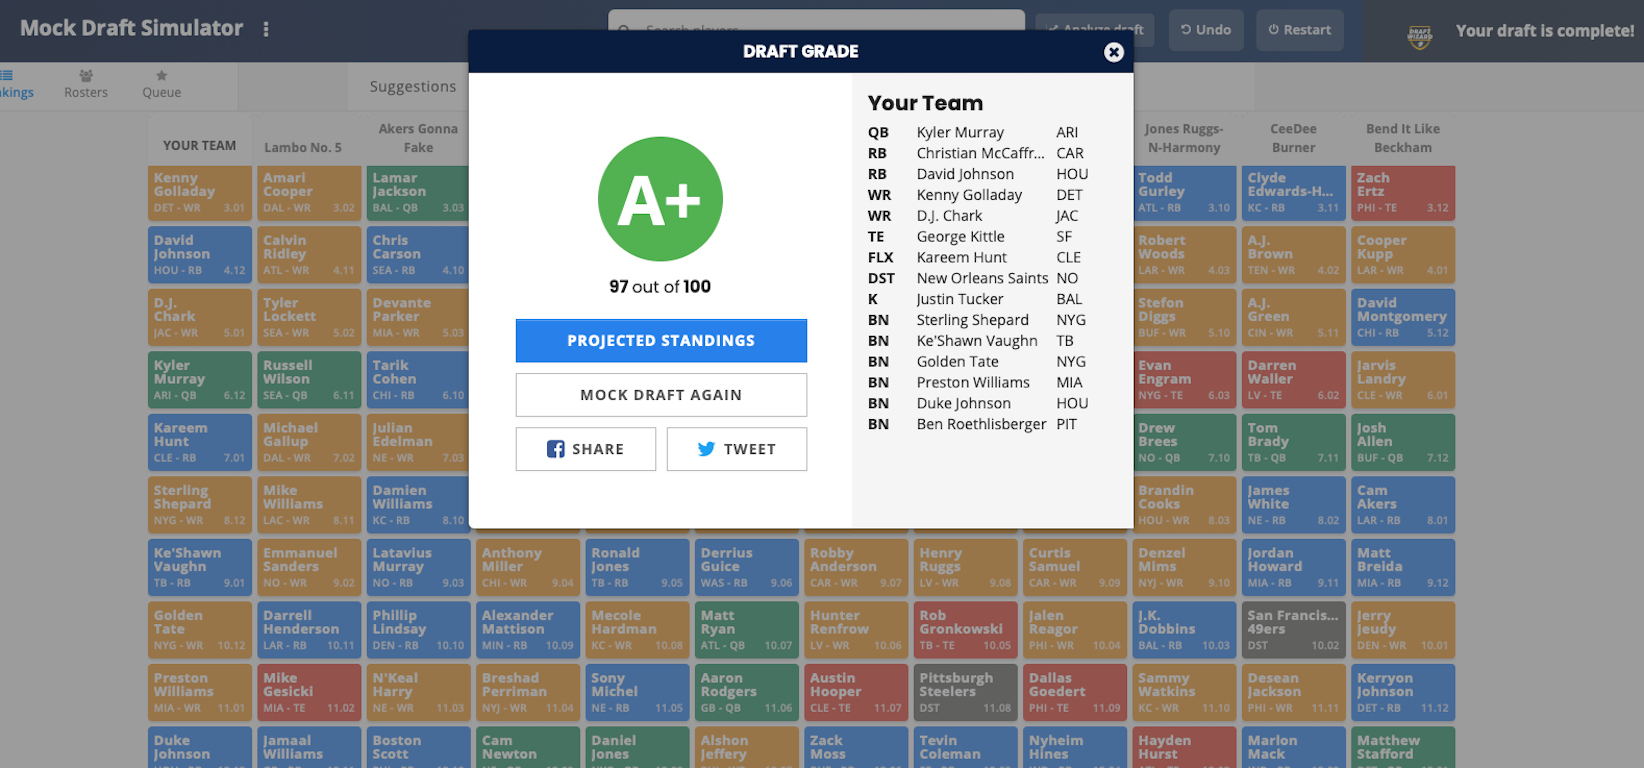 [7/15/2020] Dominate your Drafts with Draft Wizard: Fantasy Football 2020